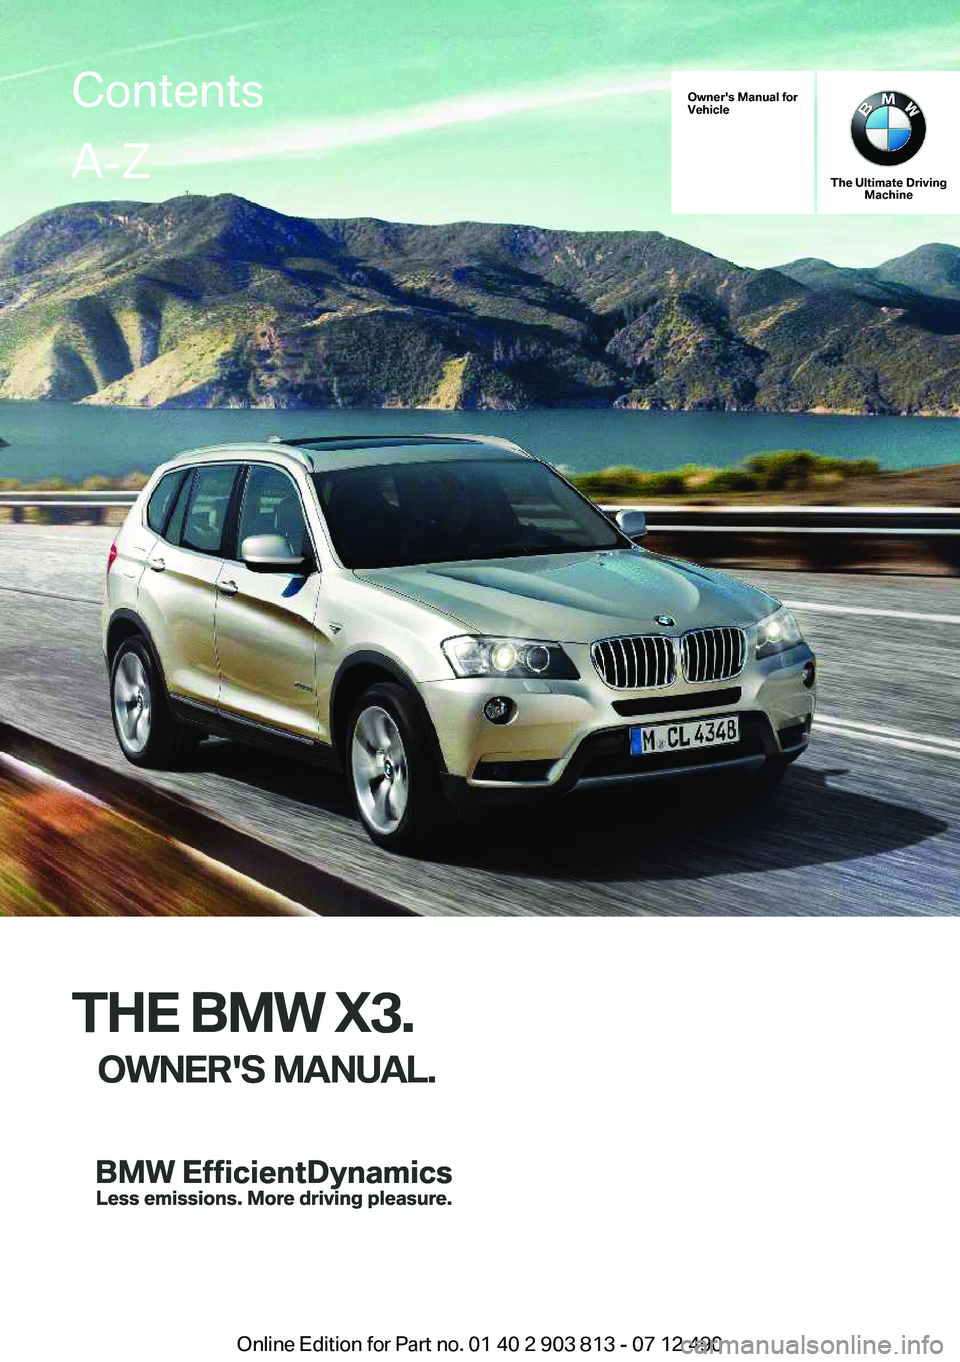 BMW X3 XDRIVE 28I 2013  Owners Manual Owner's Manual for
Vehicle
THE BMW X3.
OWNER'S MANUAL.
The Ultimate Driving Machine
THE BMW X3.
OWNER'S MANUAL.
ContentsA-Z
Online Edition for Part no. 01 40 2 903 813 - 07 12 490    